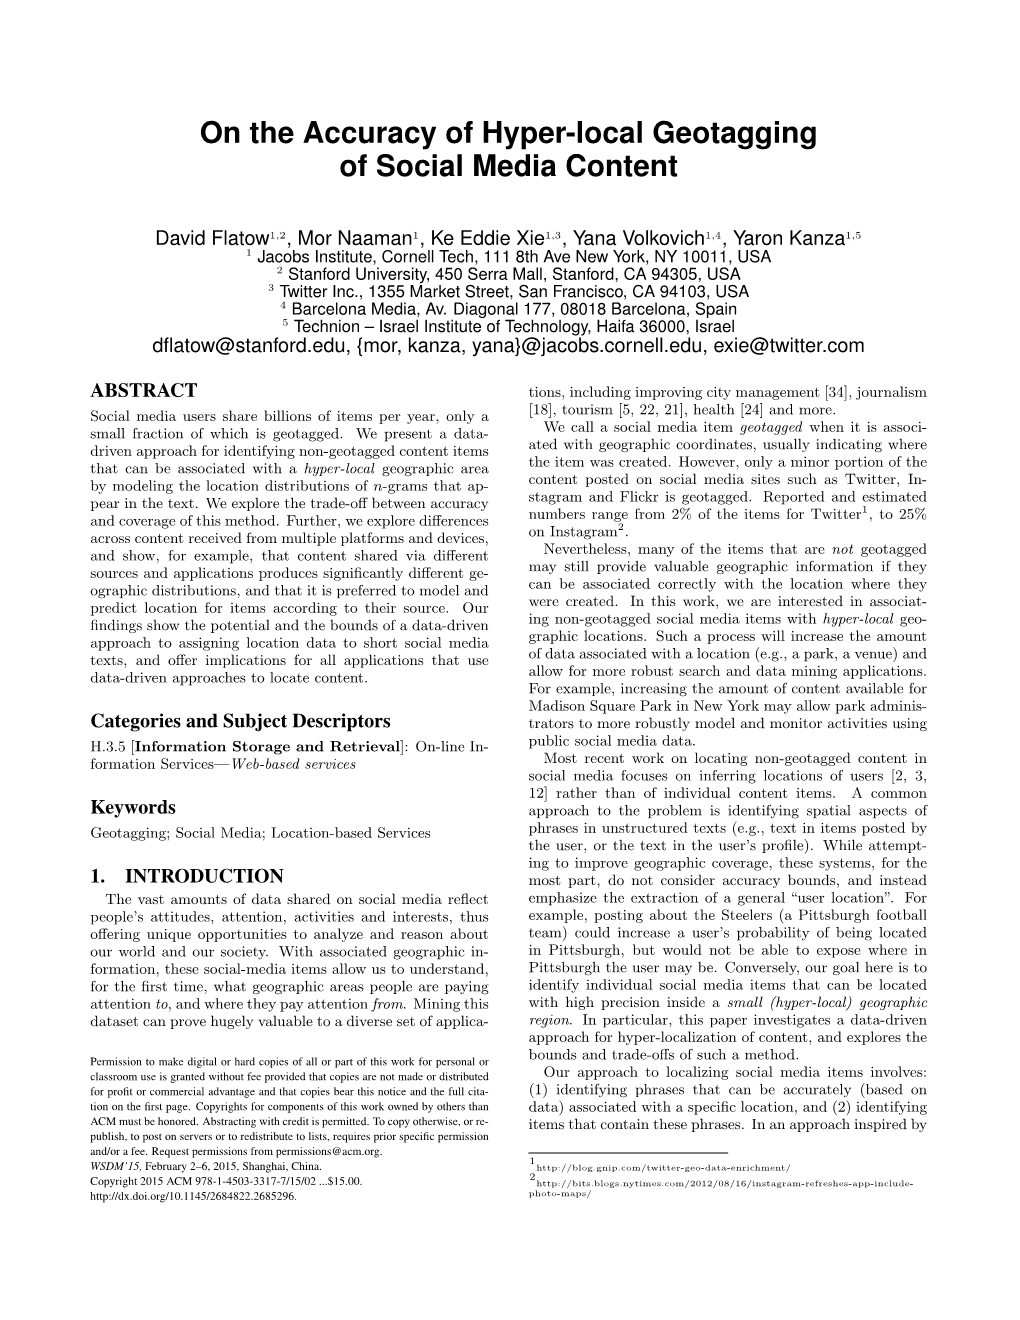 On the Accuracy of Hyper-Local Geotagging of Social Media Content